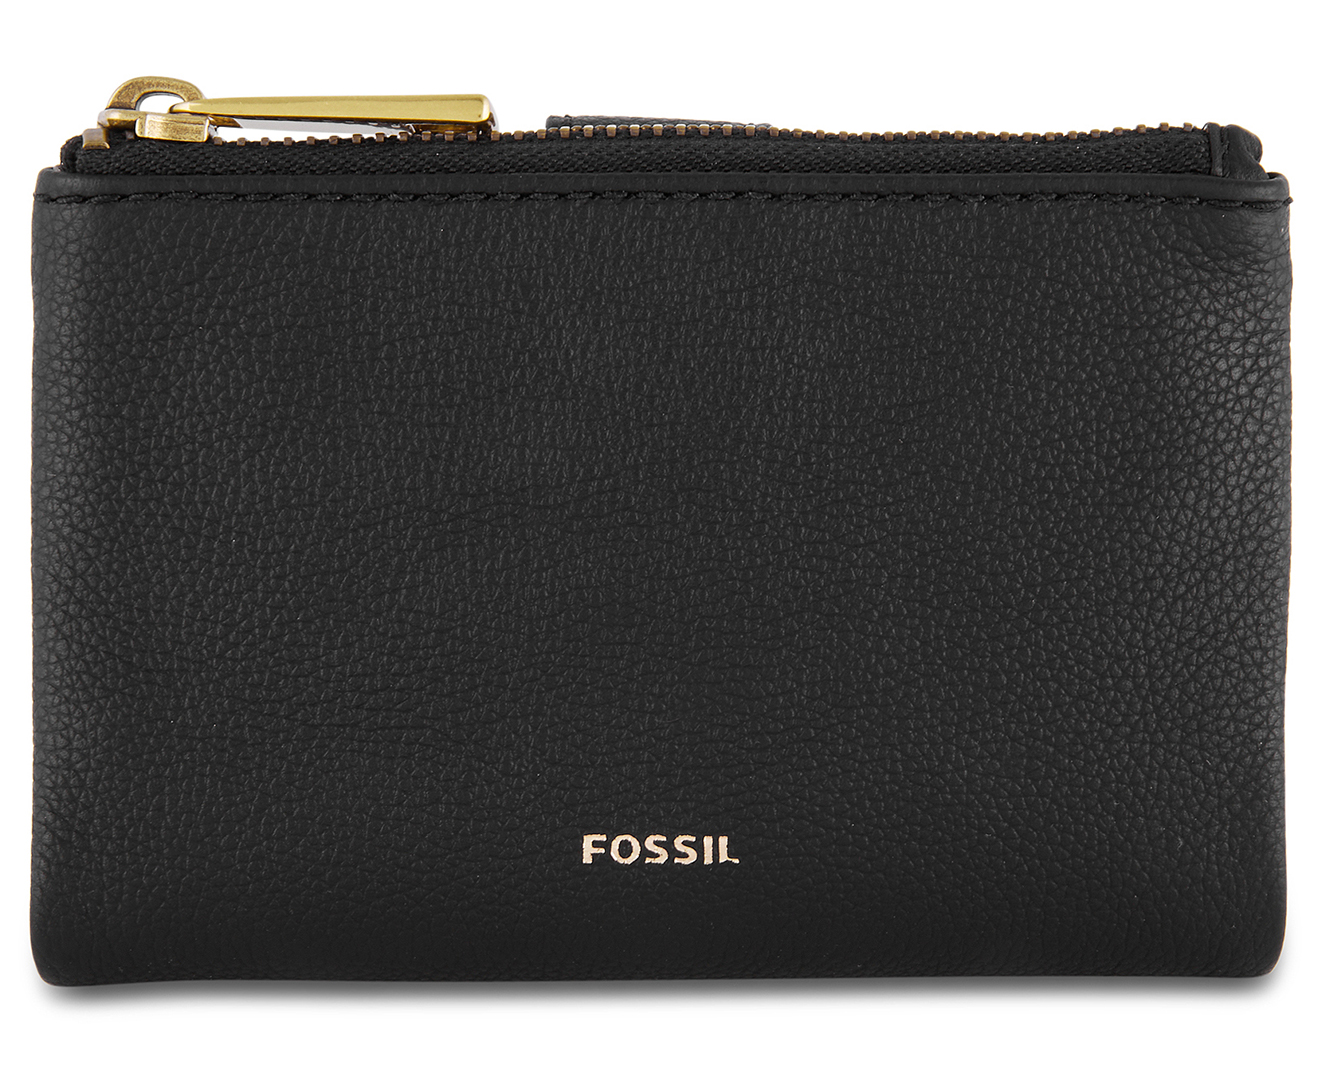 Fossil Wallet Purse Brown Genuine Leather(s)